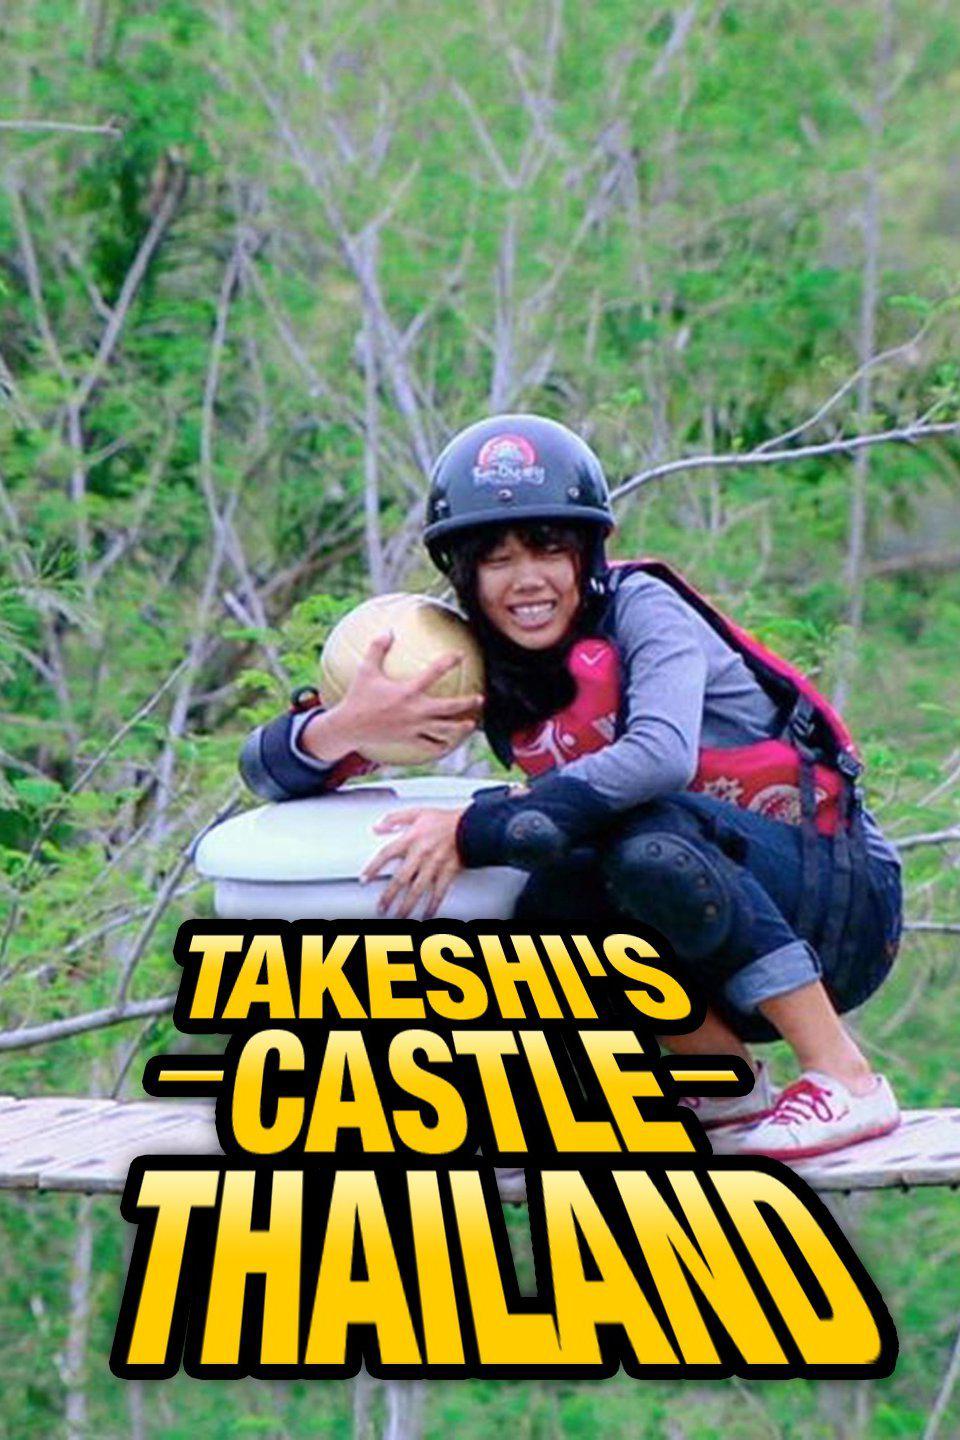 TV ratings for Takeshi's Castle Thailand in South Korea. Challenge TV TV series